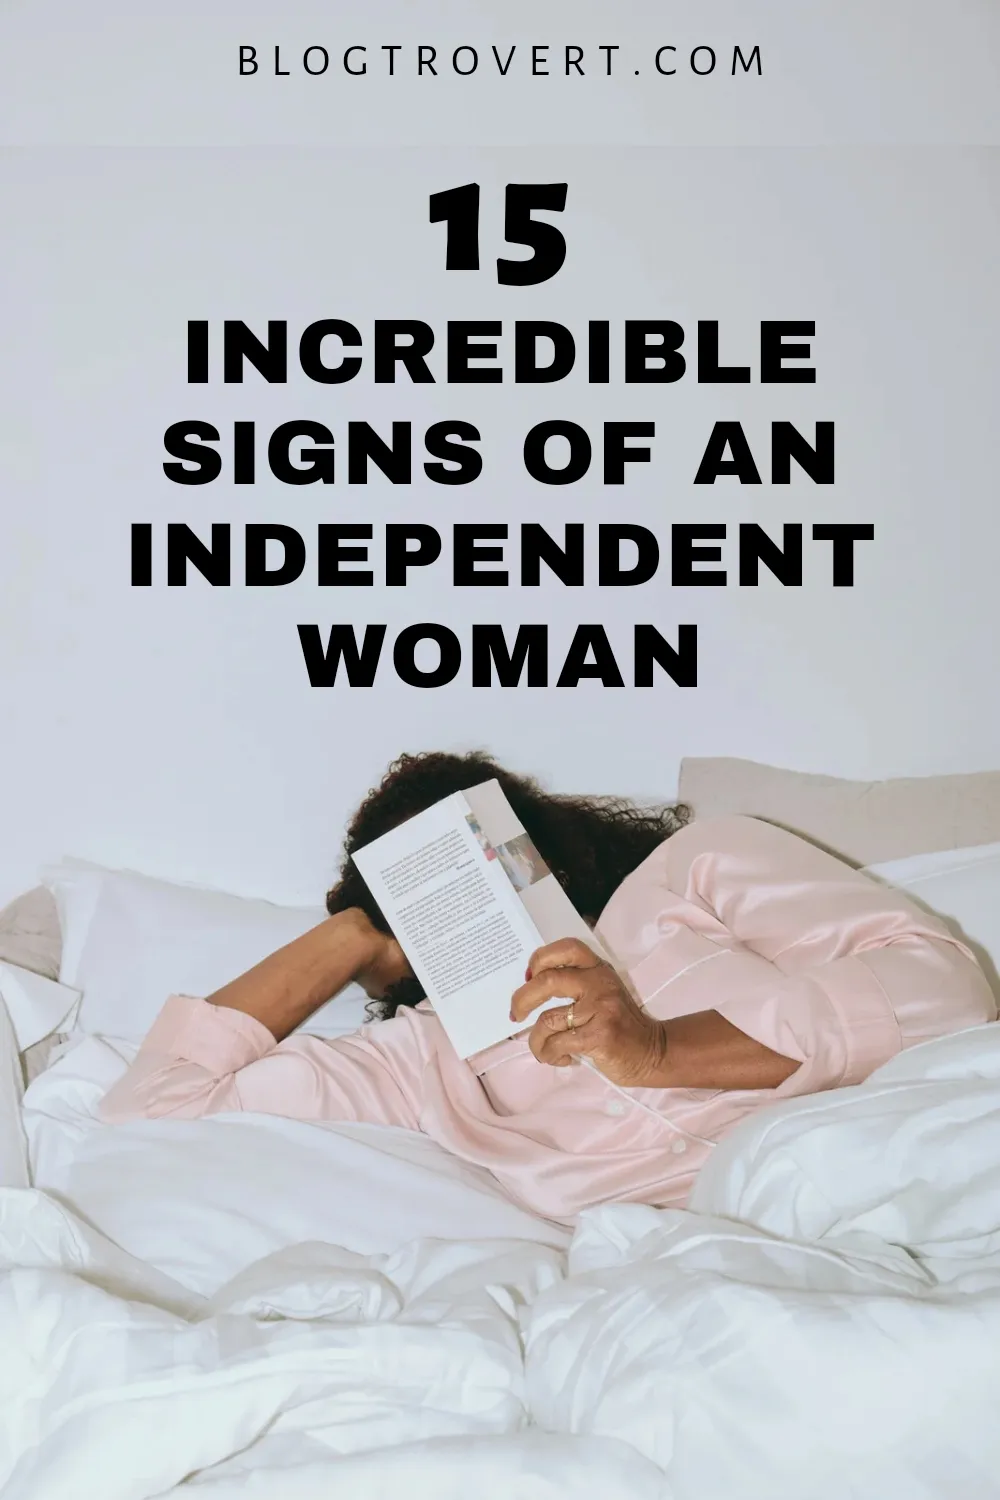 15 characteristics of an independent woman that will inspire you 4